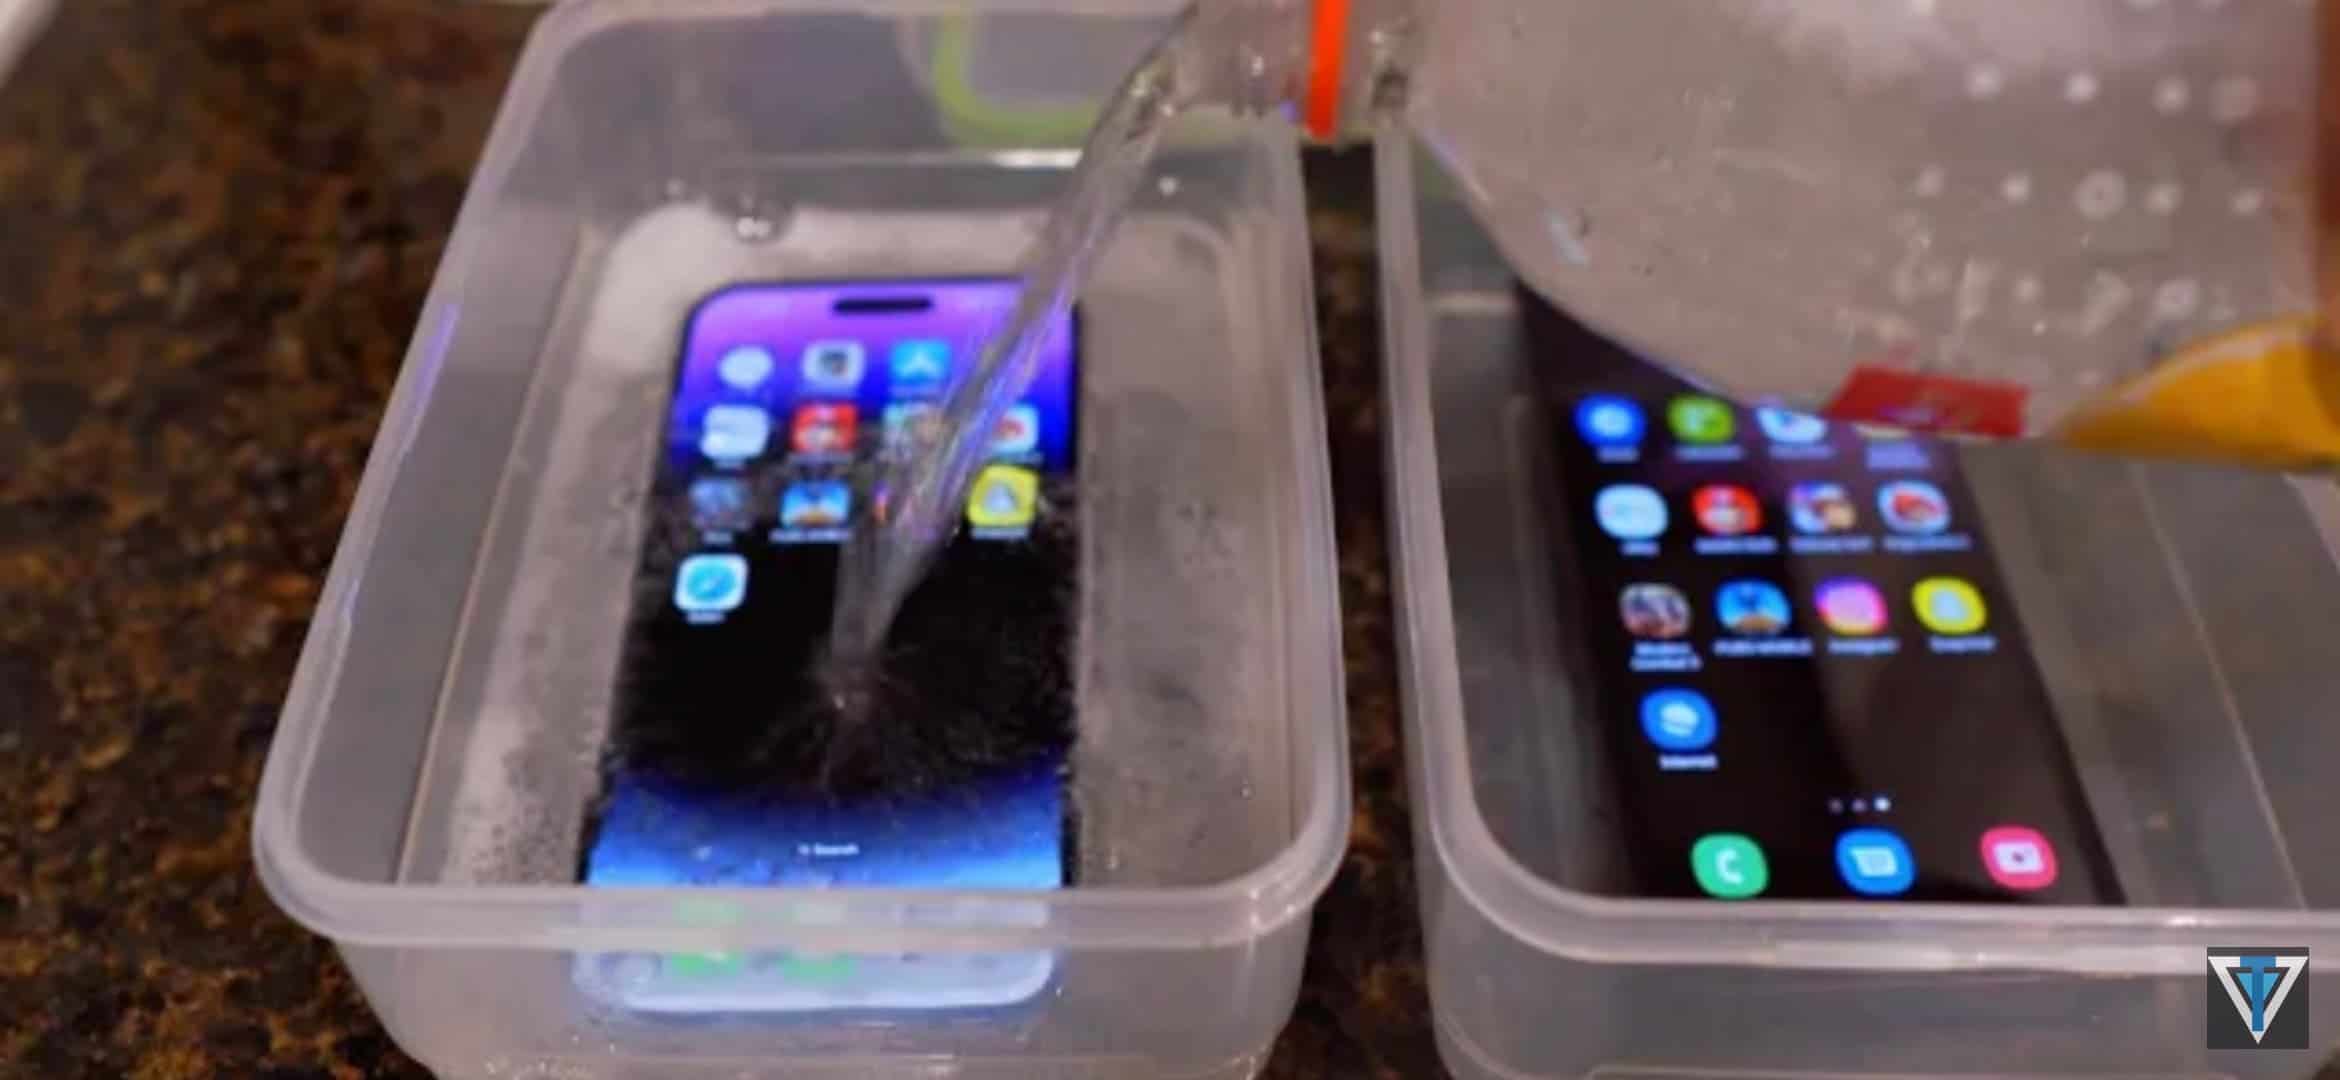 Samsung And iPhone water test